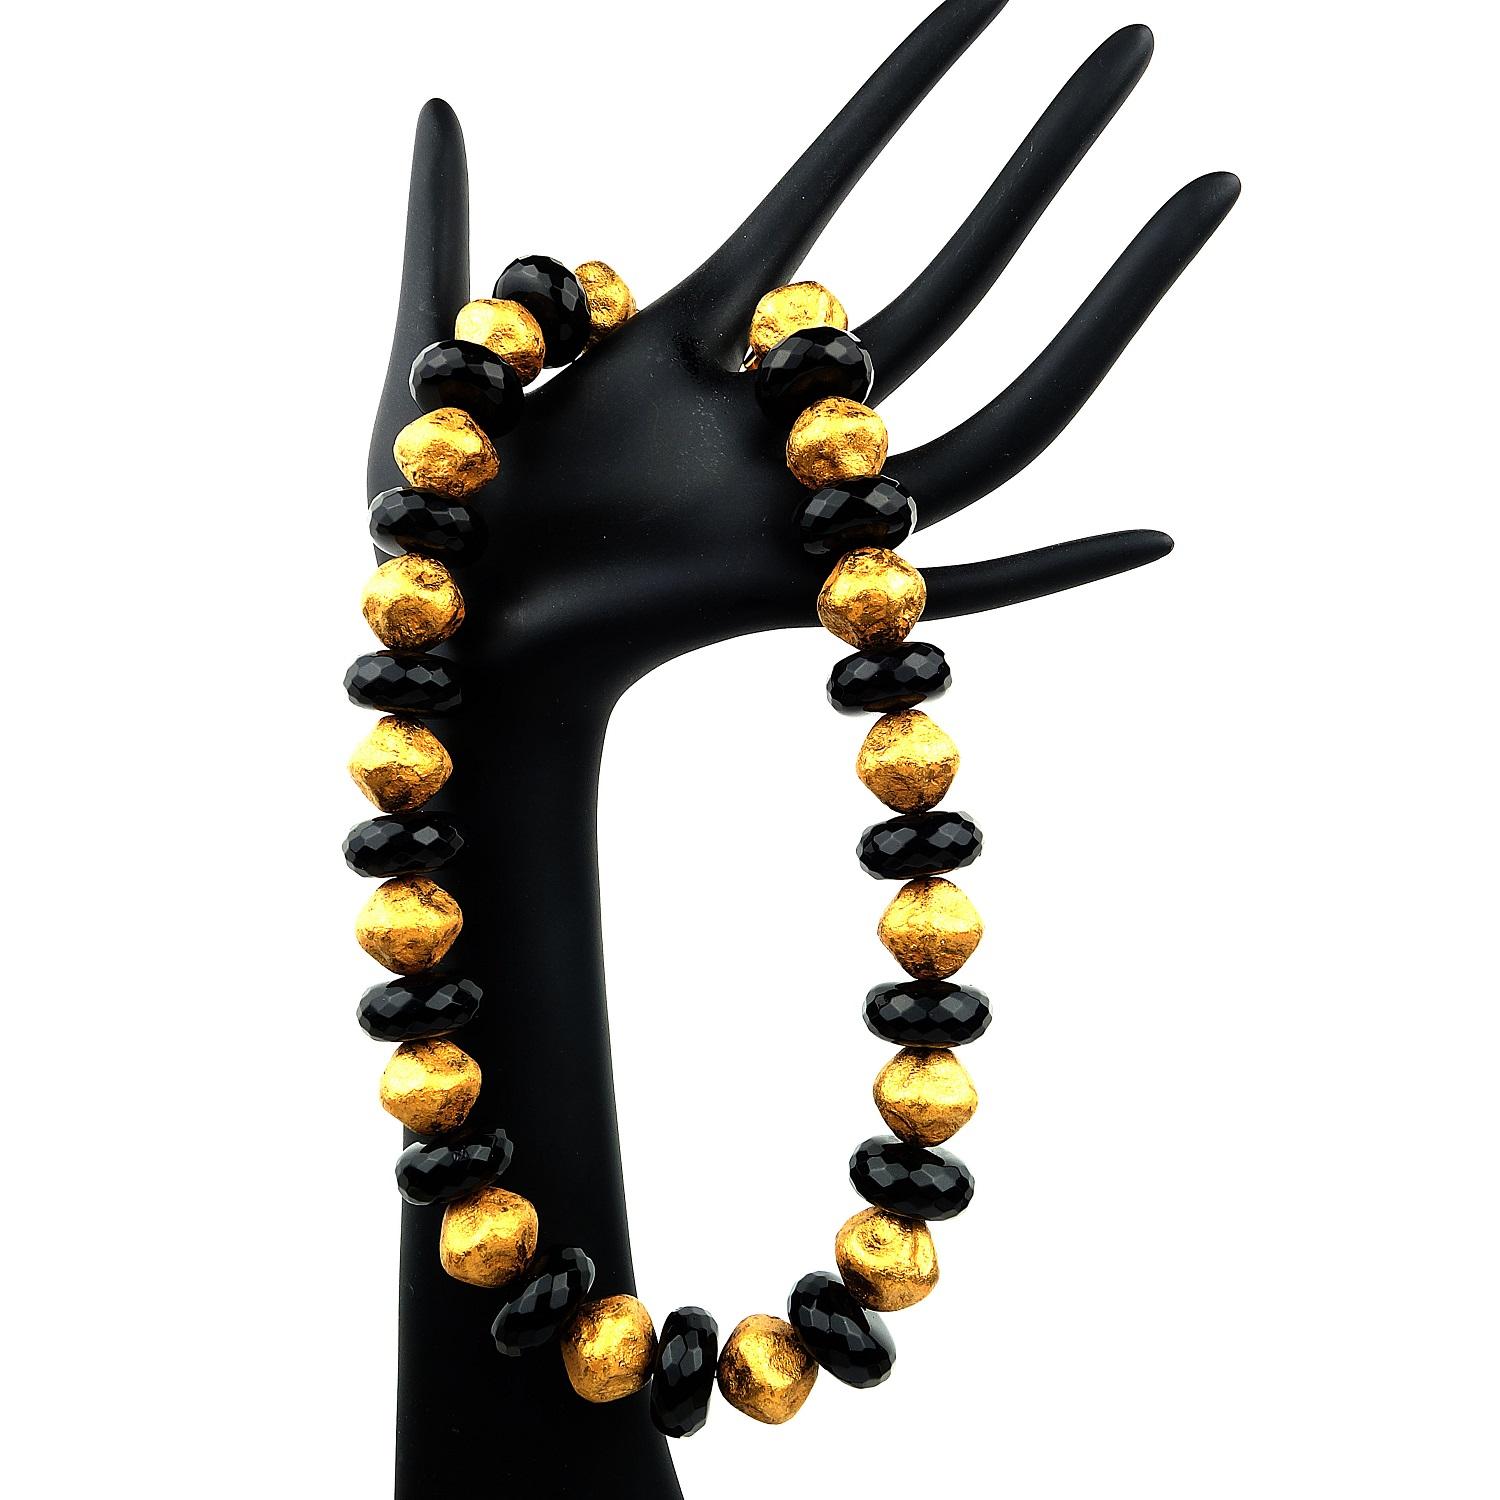 Artisan AJD 18 Inch Elegant Black Onyx and Antique Gold Bead Necklace  Great Gift!! For Sale